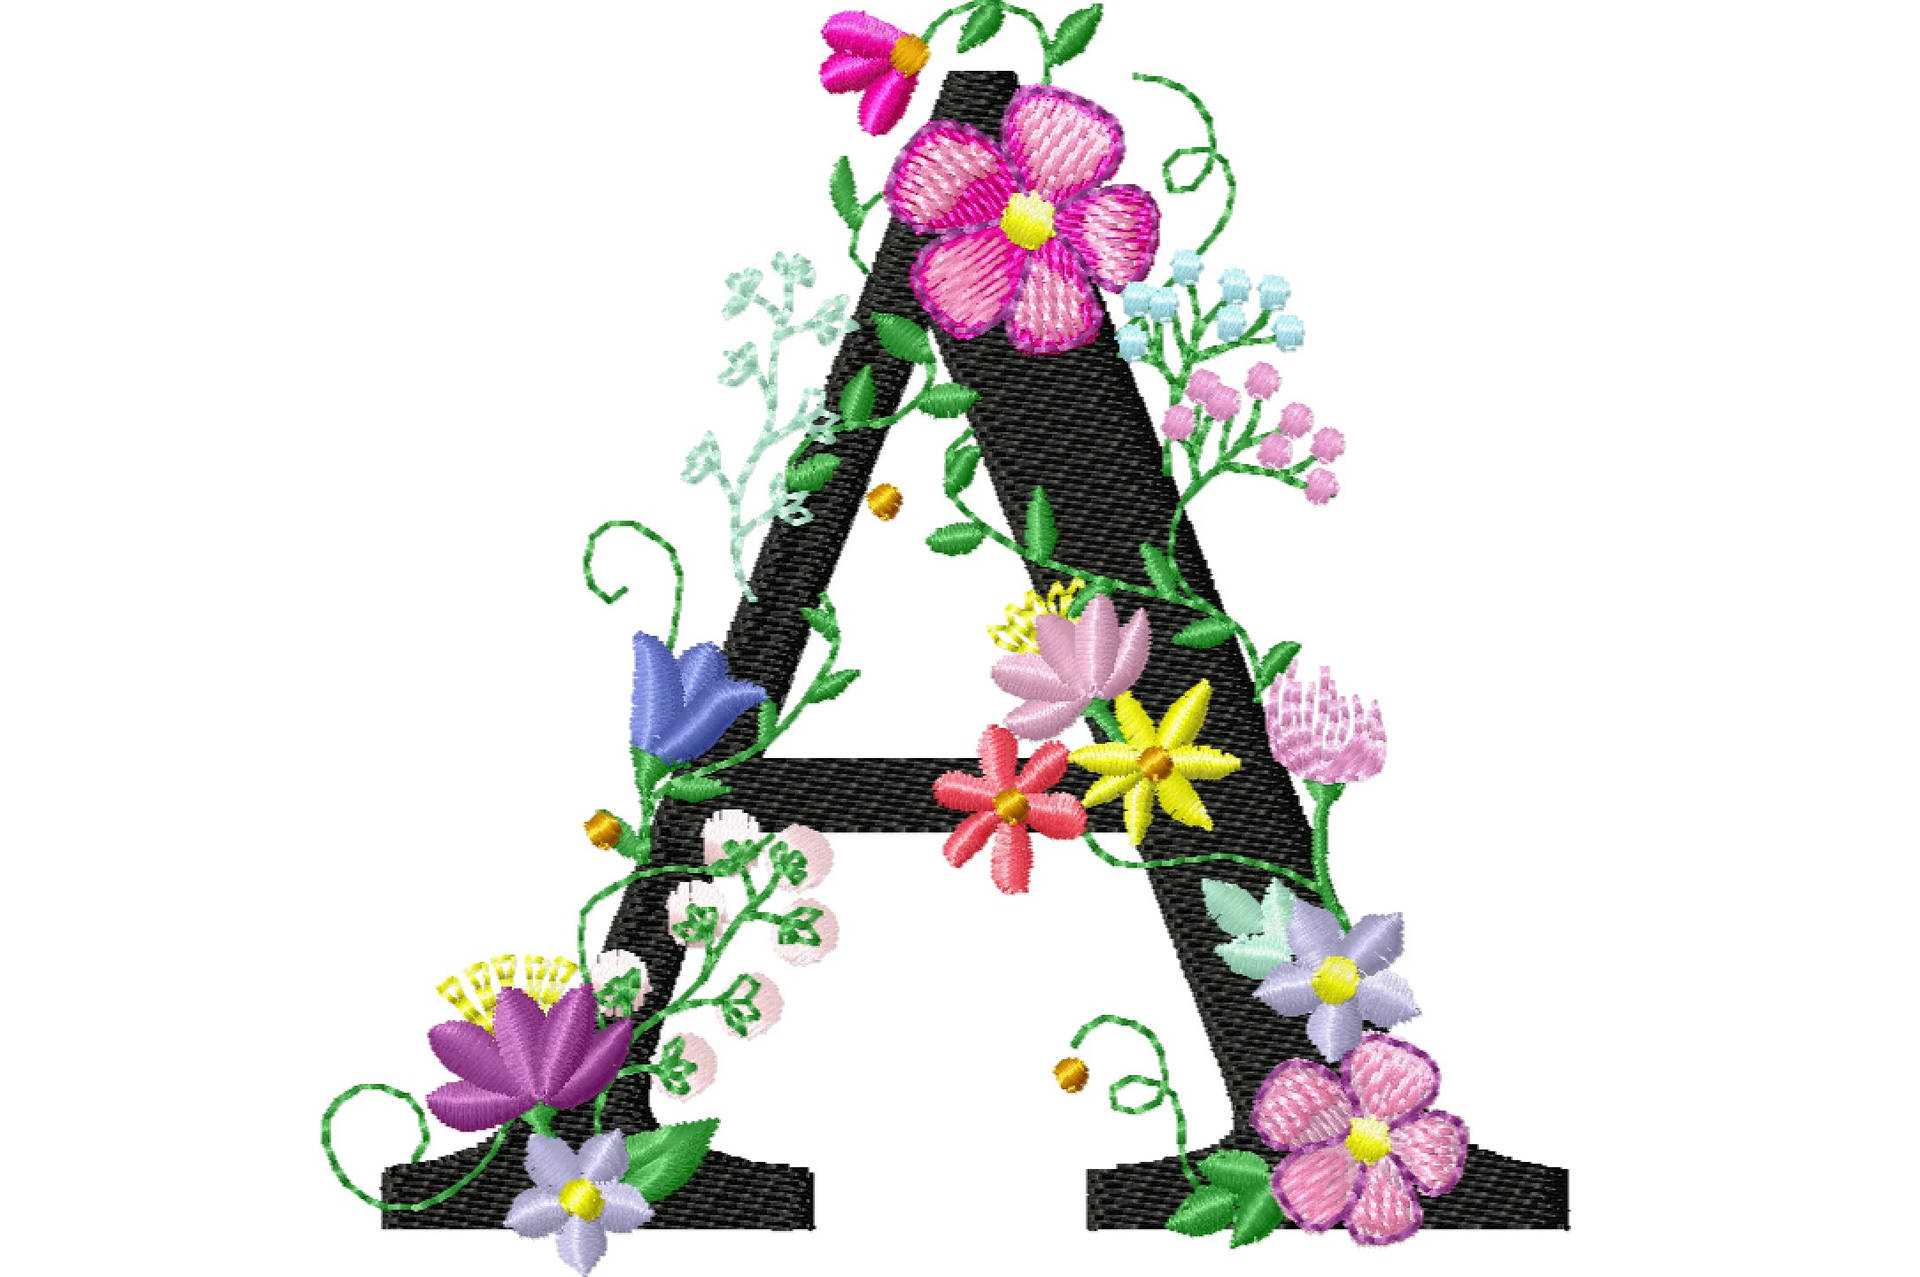 Embroidered Alphabet Letter A With Colorful Flowers Background